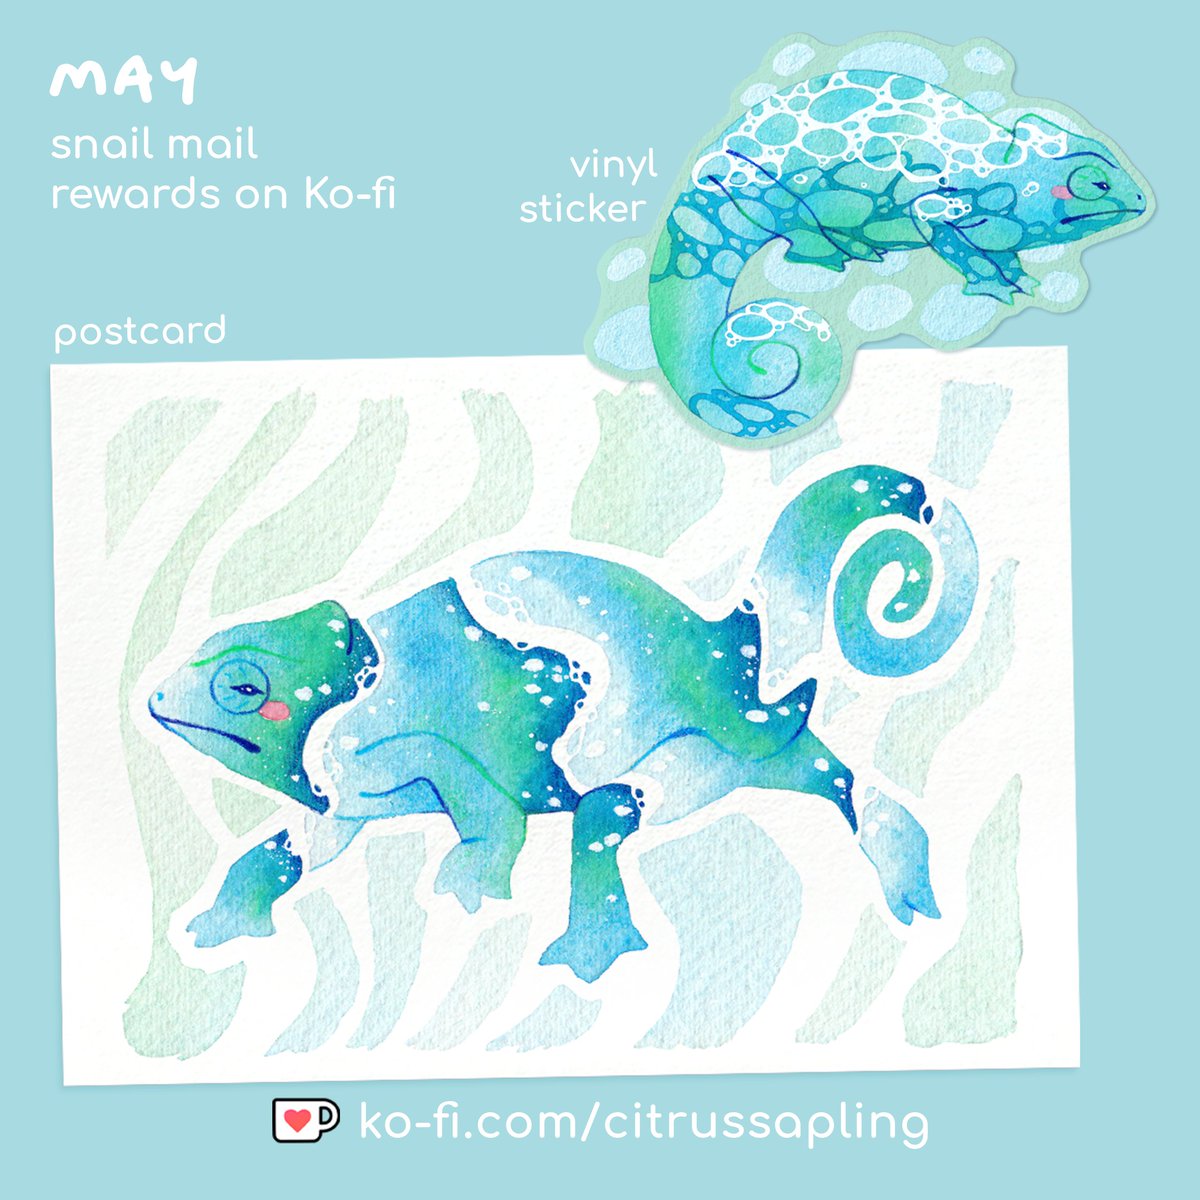 This month I've got some chameleons with an ocean twist for you 🌊 join my @kofi_button any time in May for these goodies!